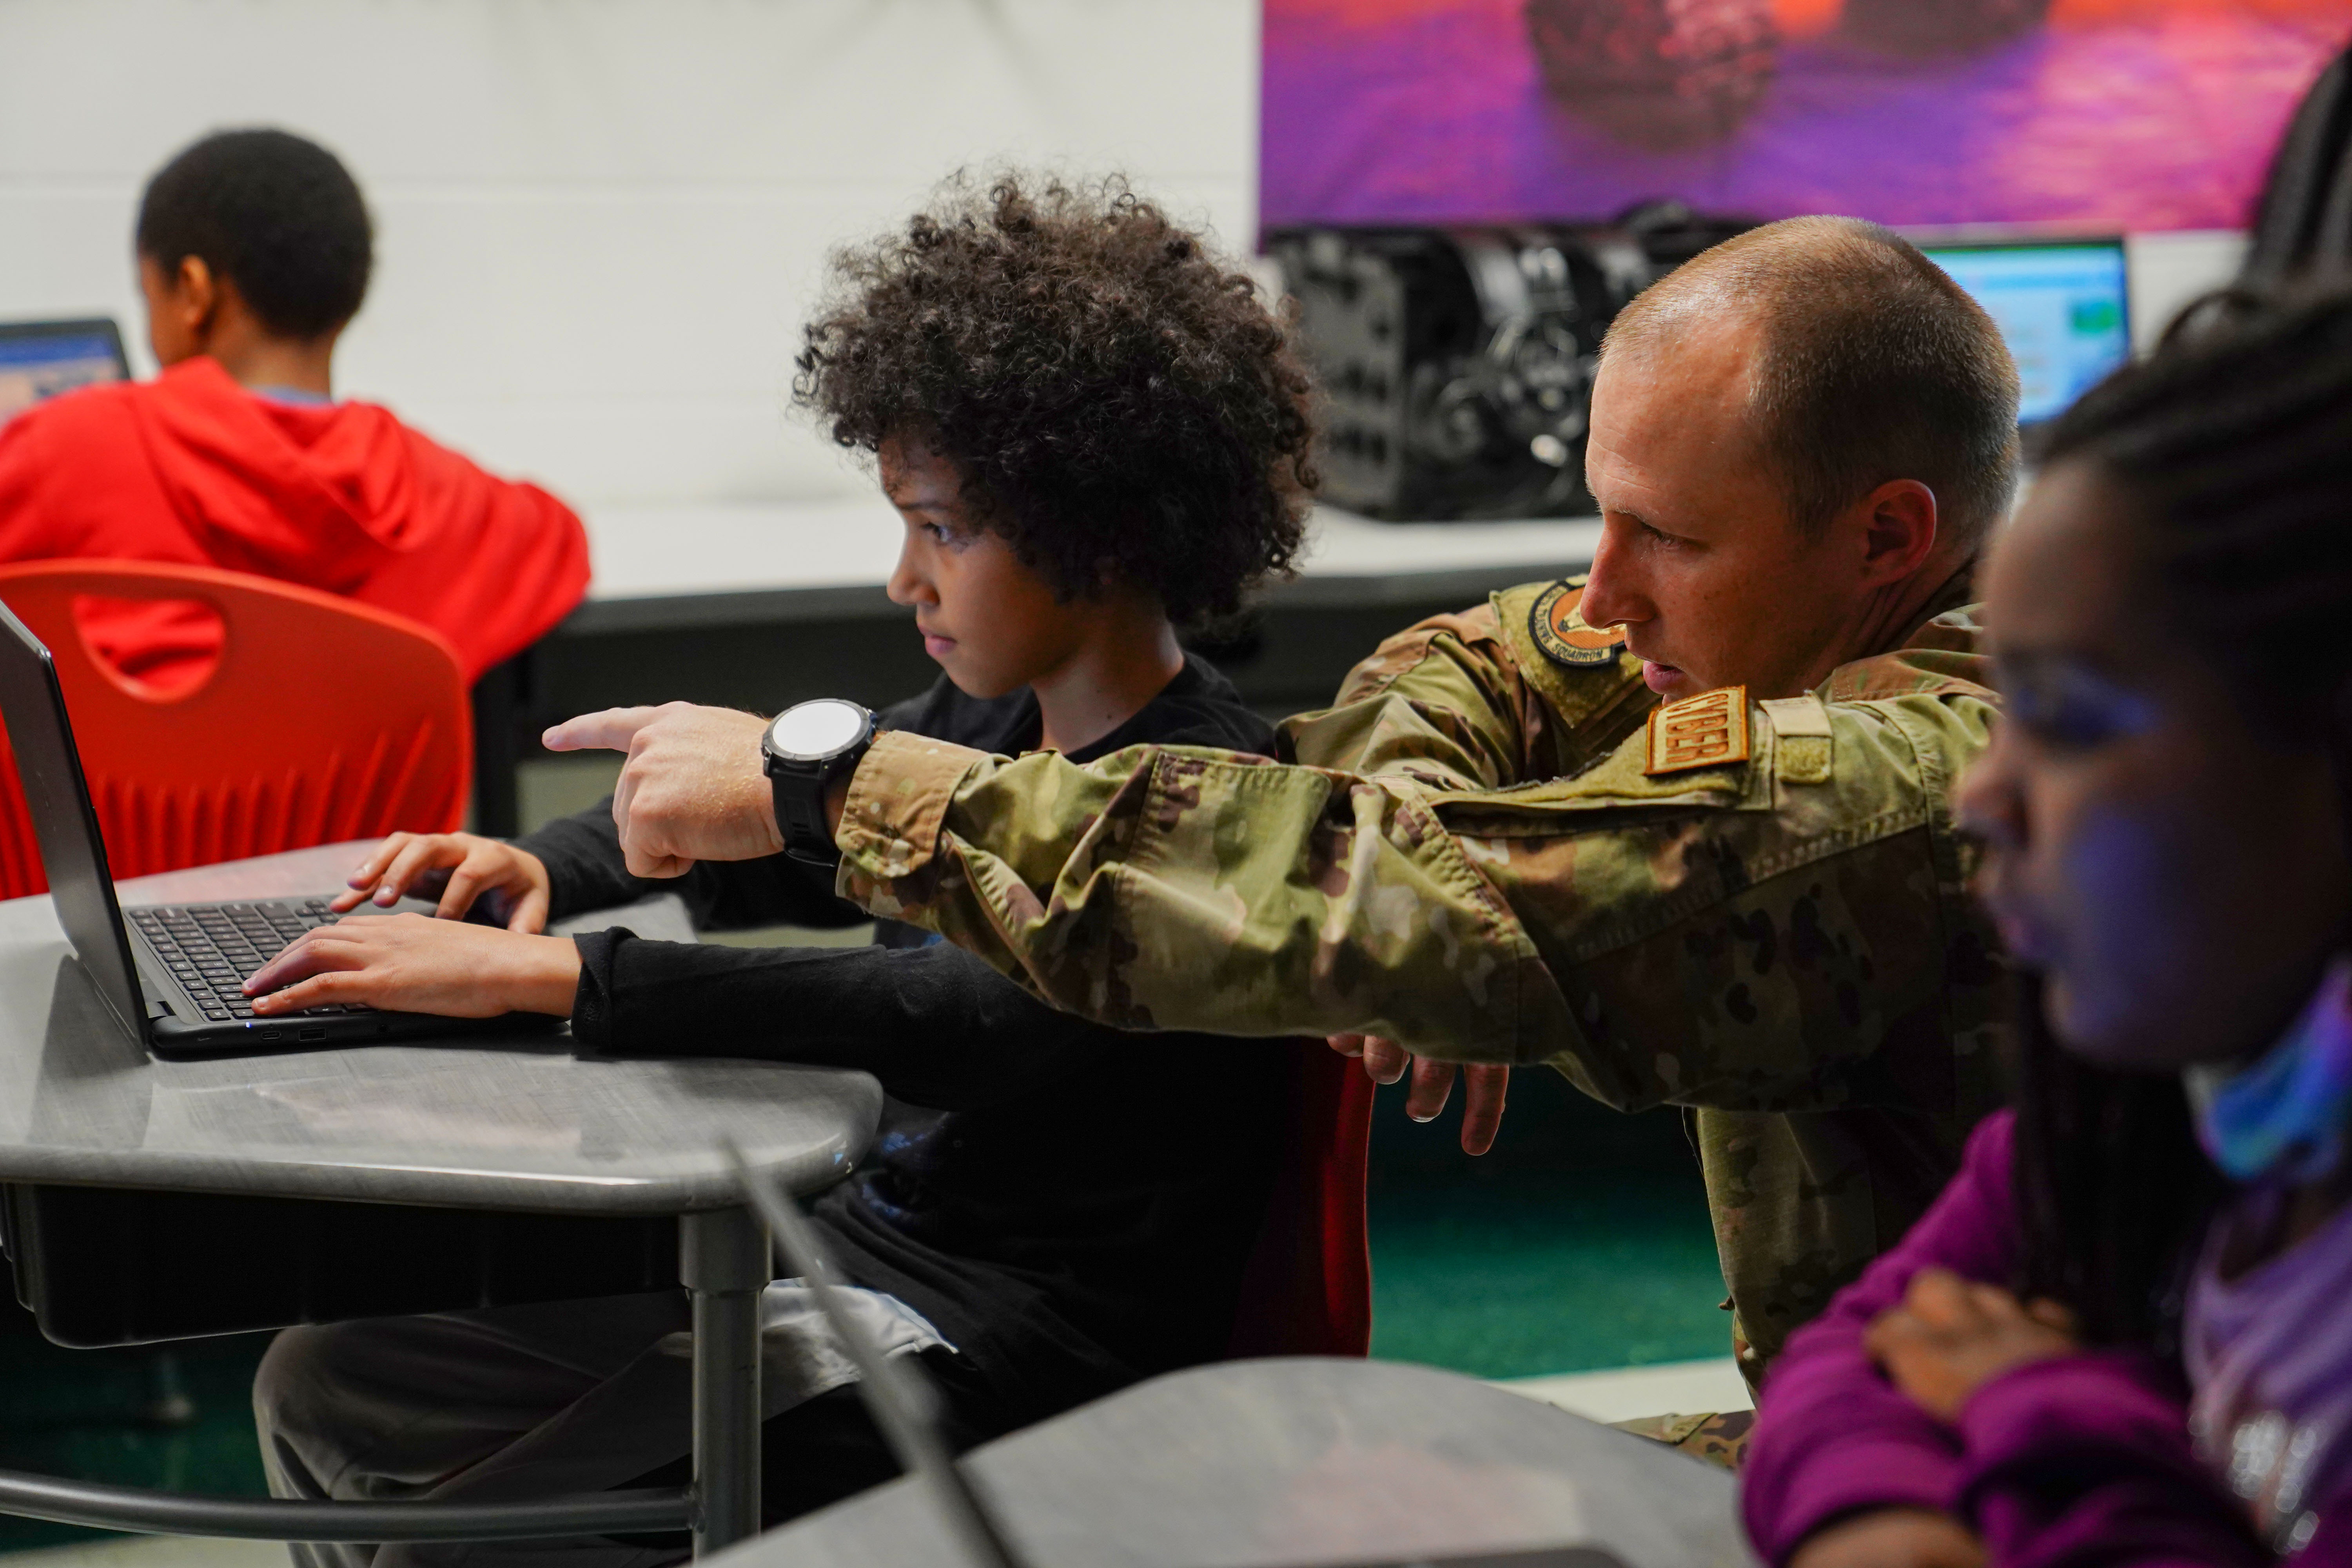 U.S. Tech. Sgt. Shane Balkcom, 336th Training Squadron learning program manager, shows a student how to create basic algorithm blocks at Back Bay Elementary School, Mississippi, on March 23, 2023.